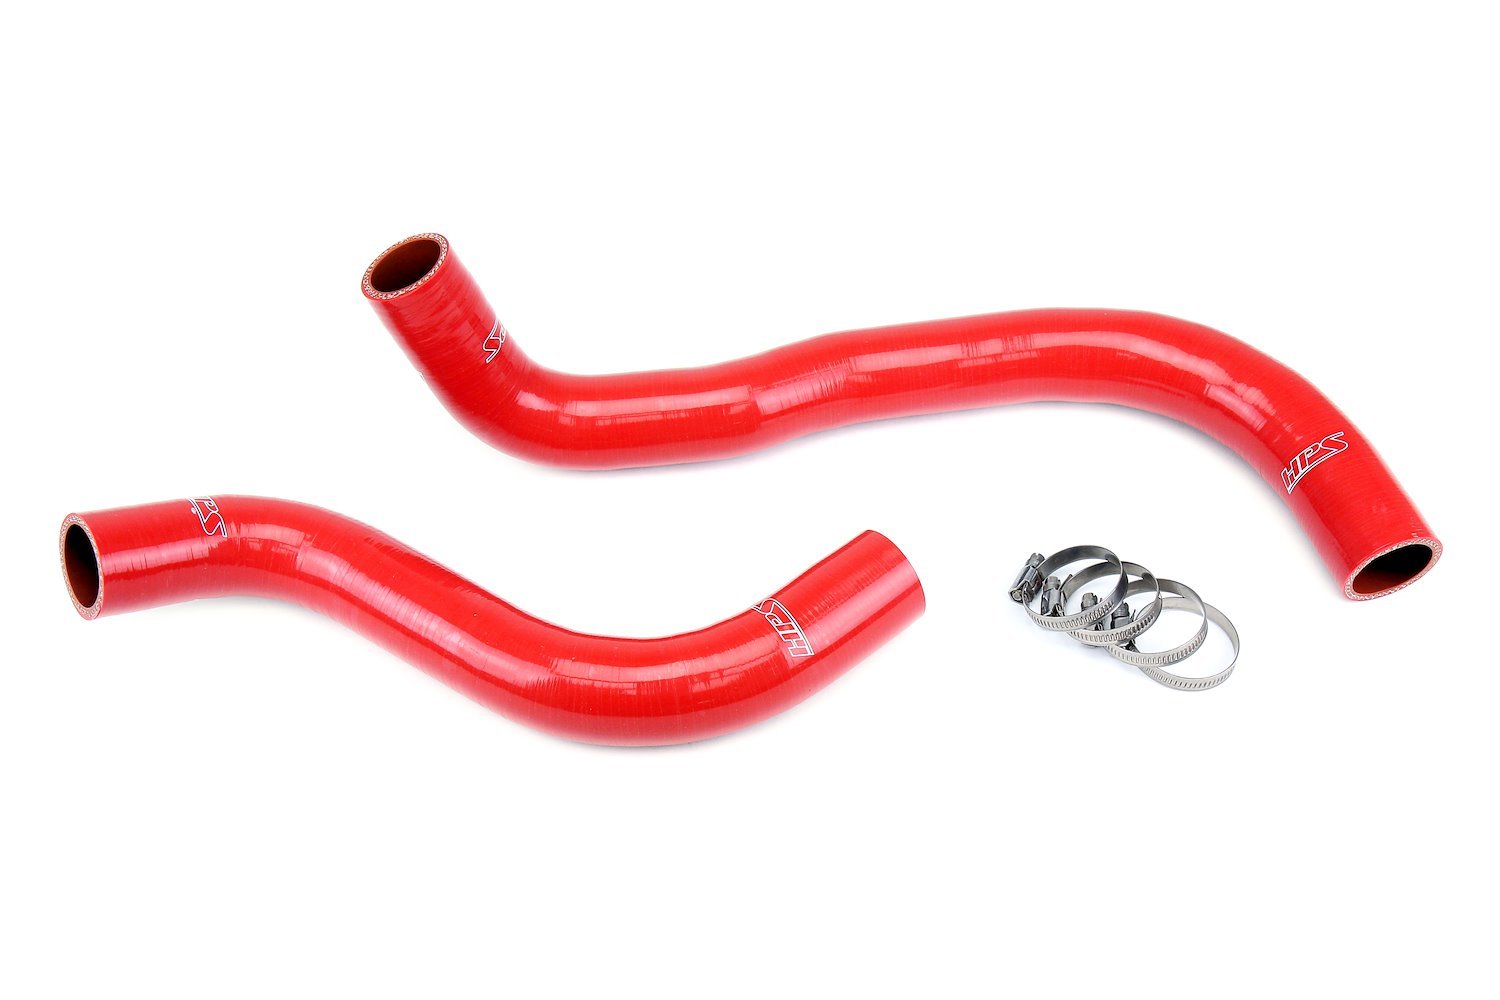 57-1828-RED Radiator Hose Kit, 3-Ply Reinforced Silicone, Replaces Rubber Radiator Coolant Hoses